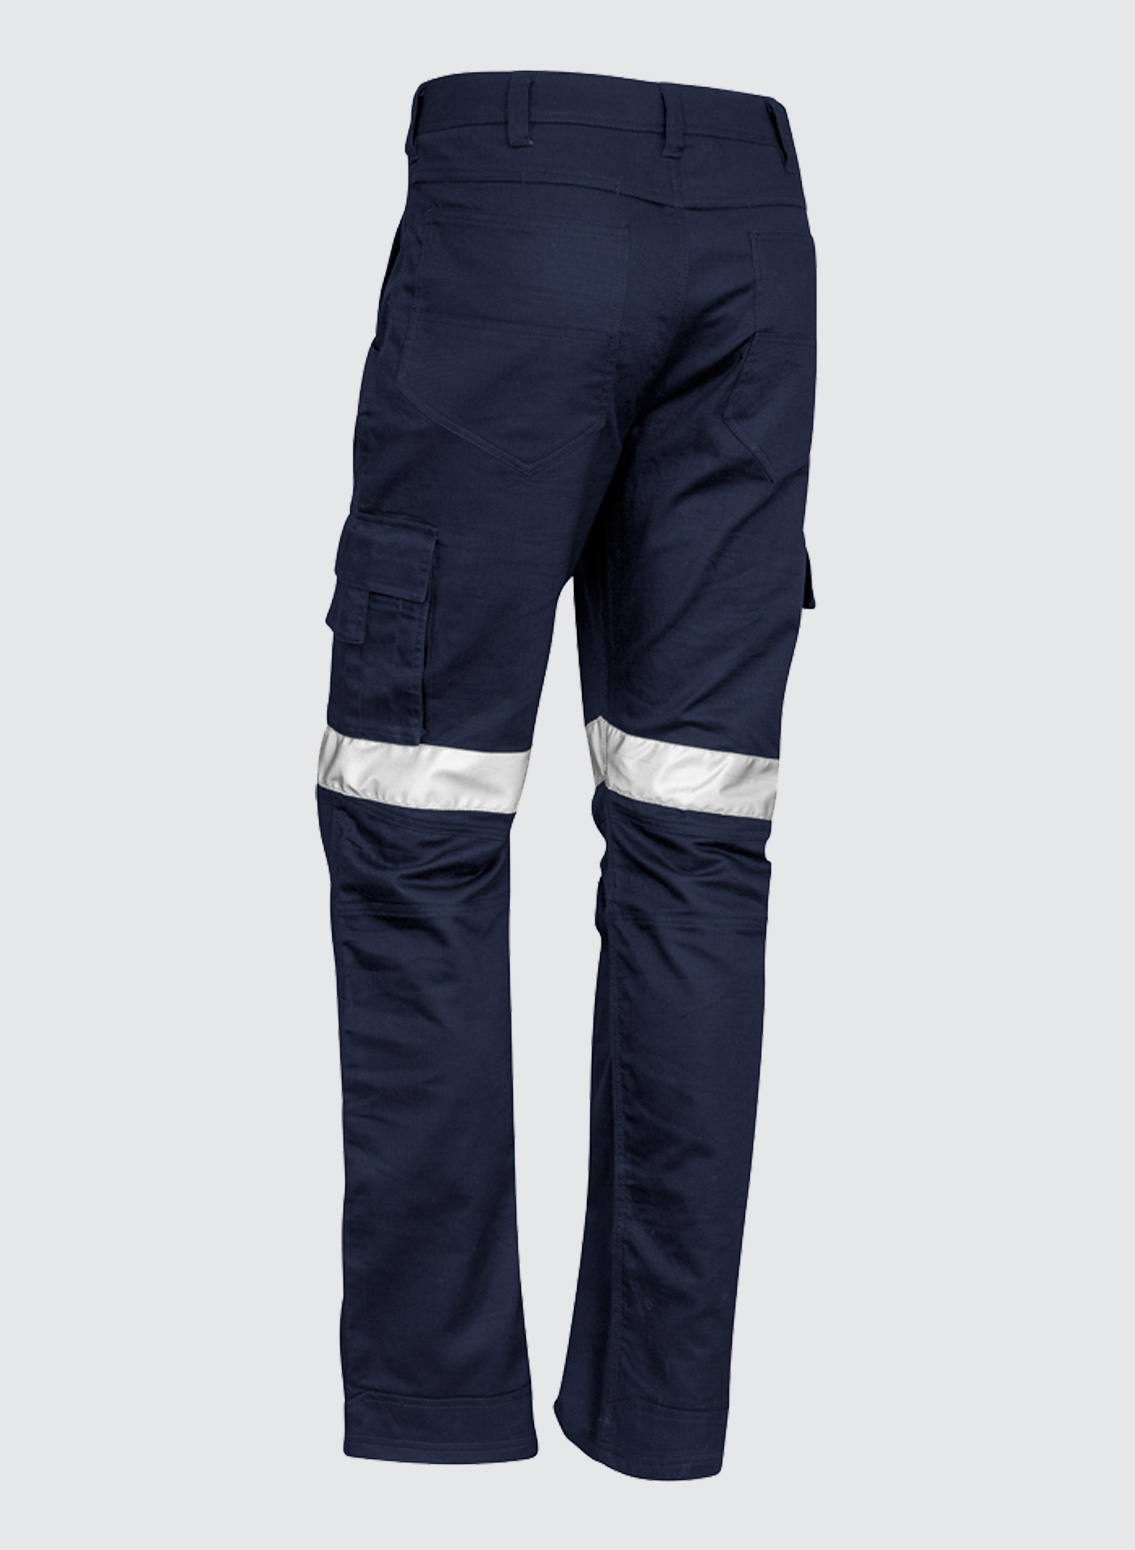 ZP904 Mens Rugged Cooling Taped Pant